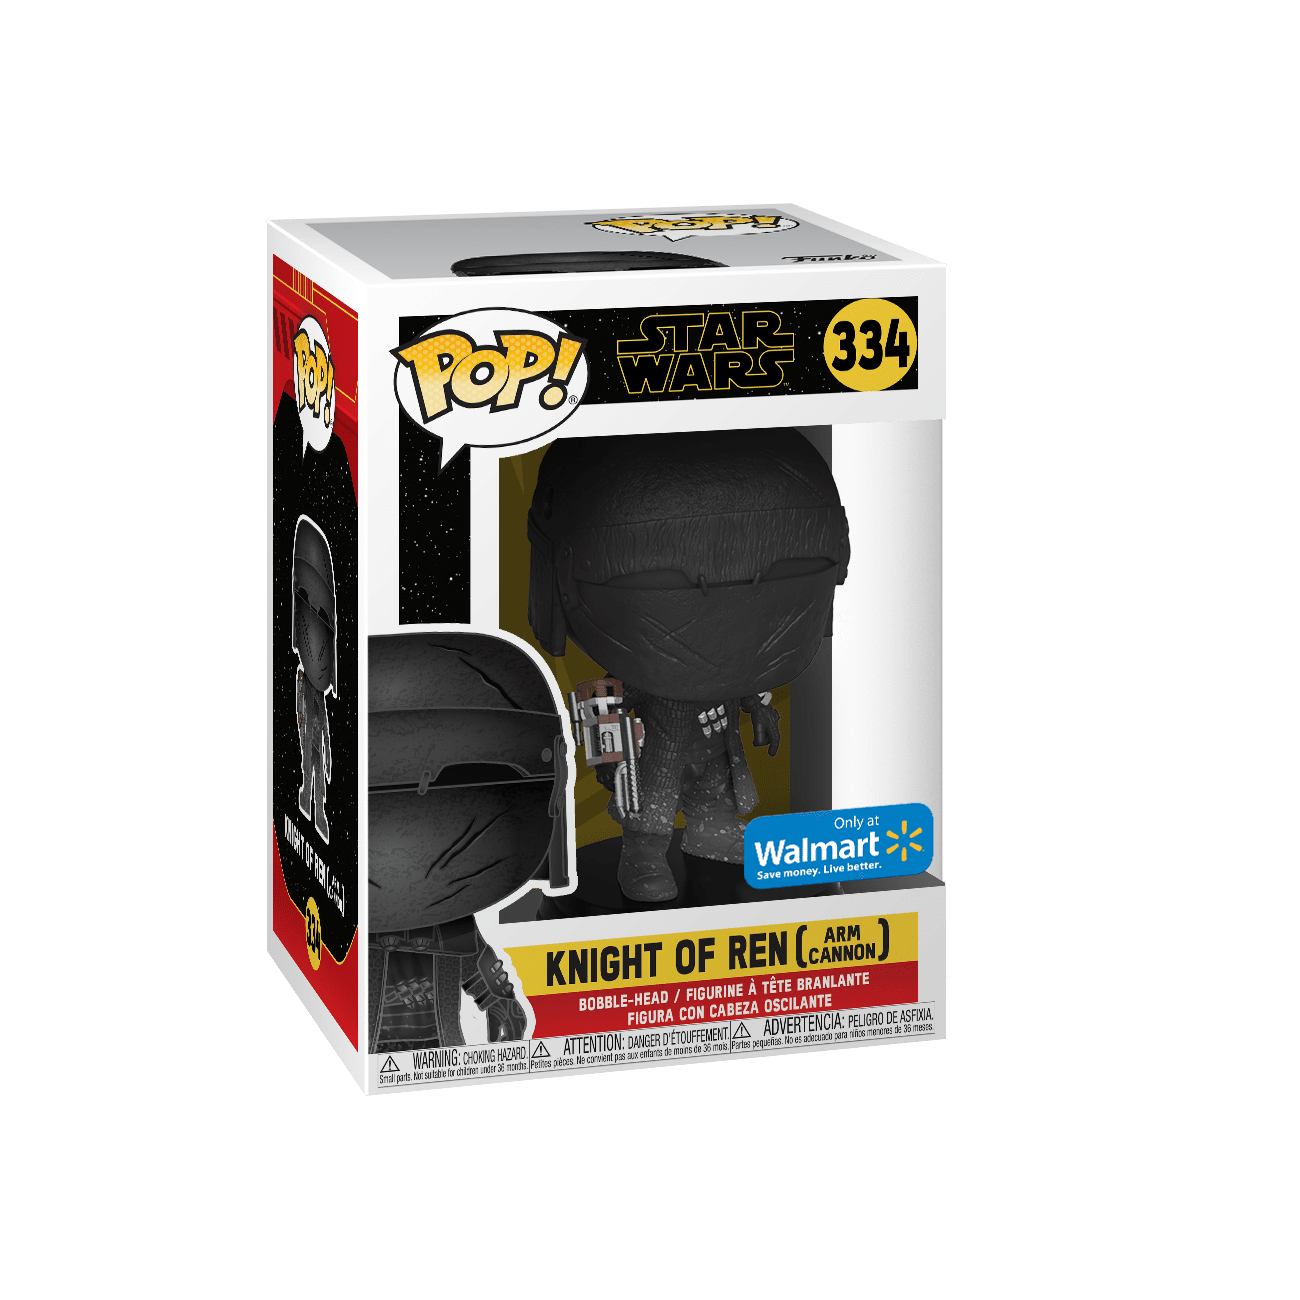 Funko Pop! Movies - Star Wars: Episode IX - The Rise of Skywalker #334 - Knight of Ren (Arm Cannon) (Exclusive) - Simply Toys